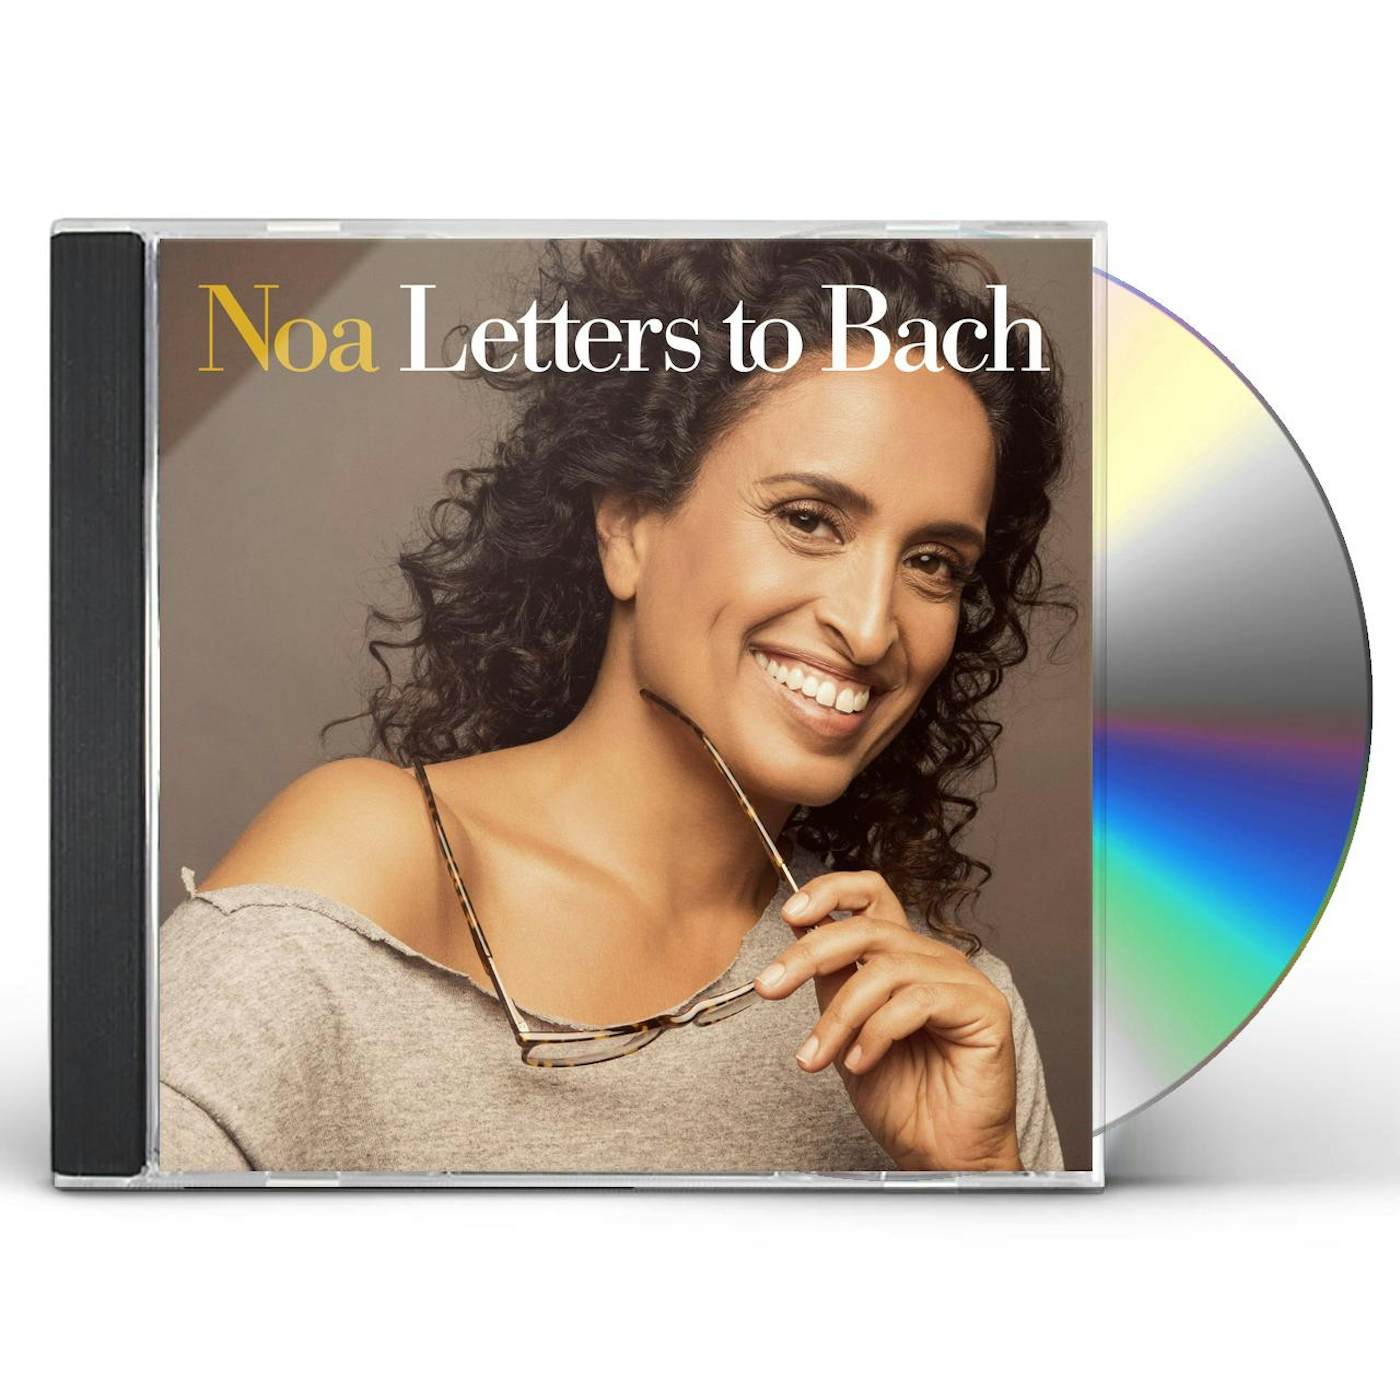 Noa LETTERS TO BACH CD